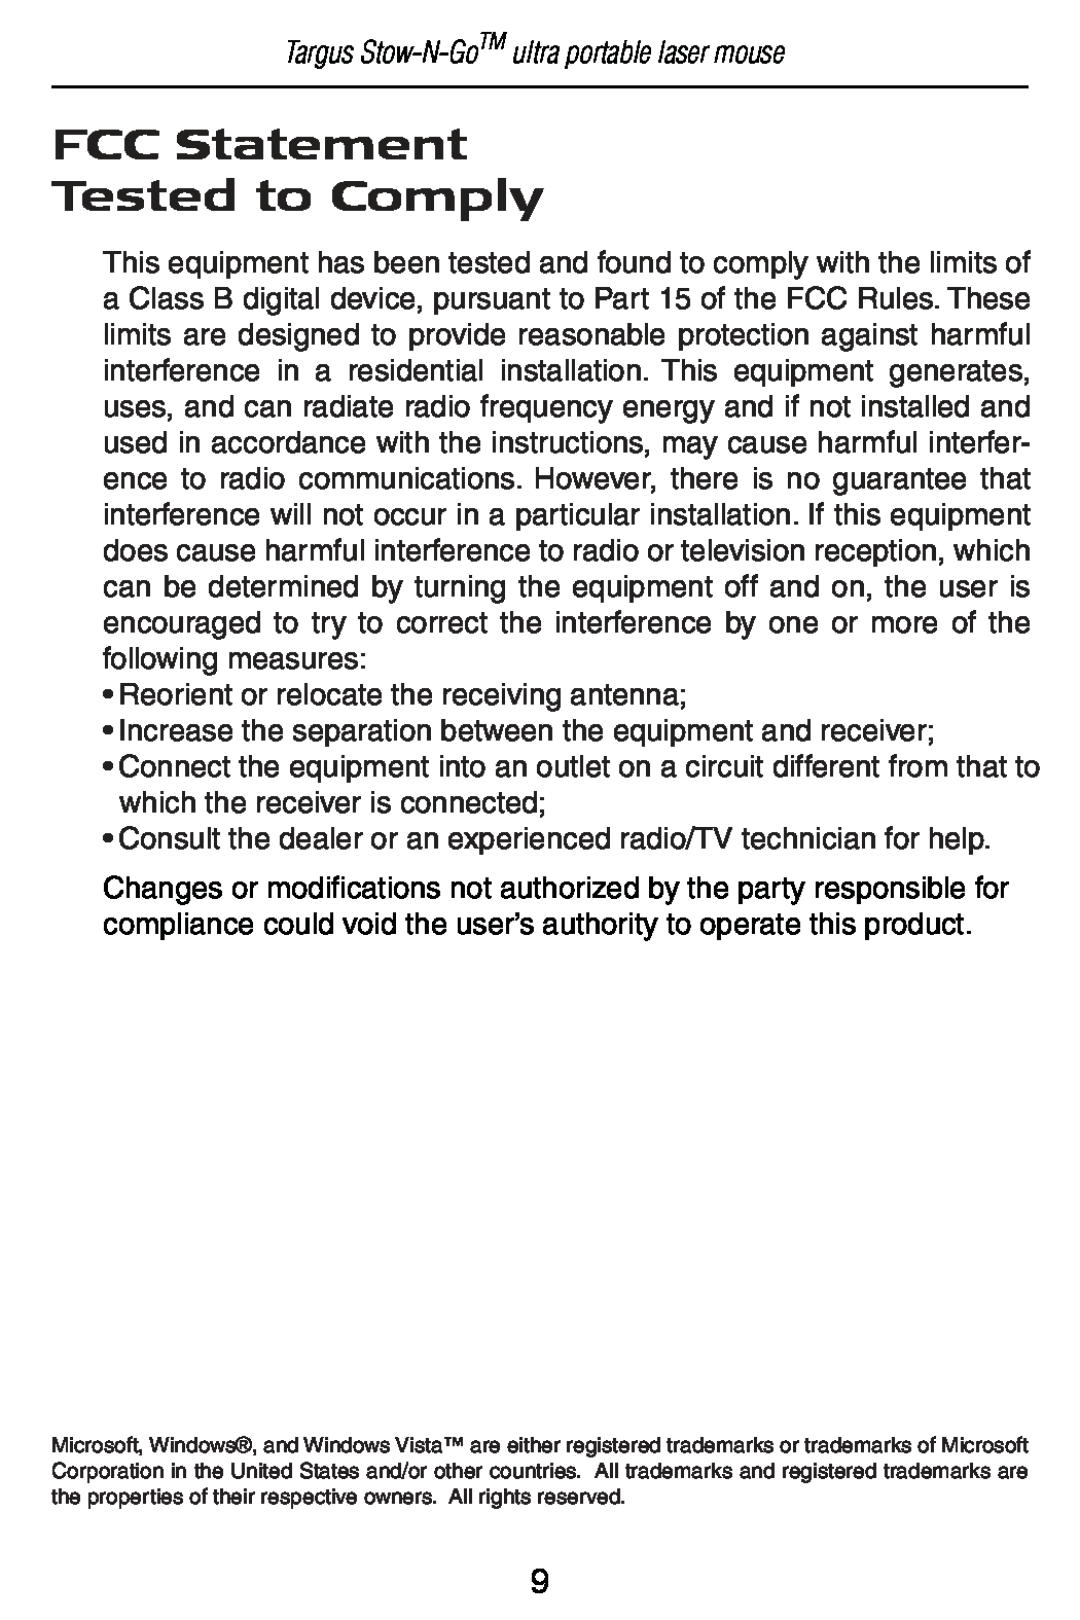 Targus AMU22US specifications FCC Statement Tested to Comply, Targus Stow-N-GoTM ultra portable laser mouse 